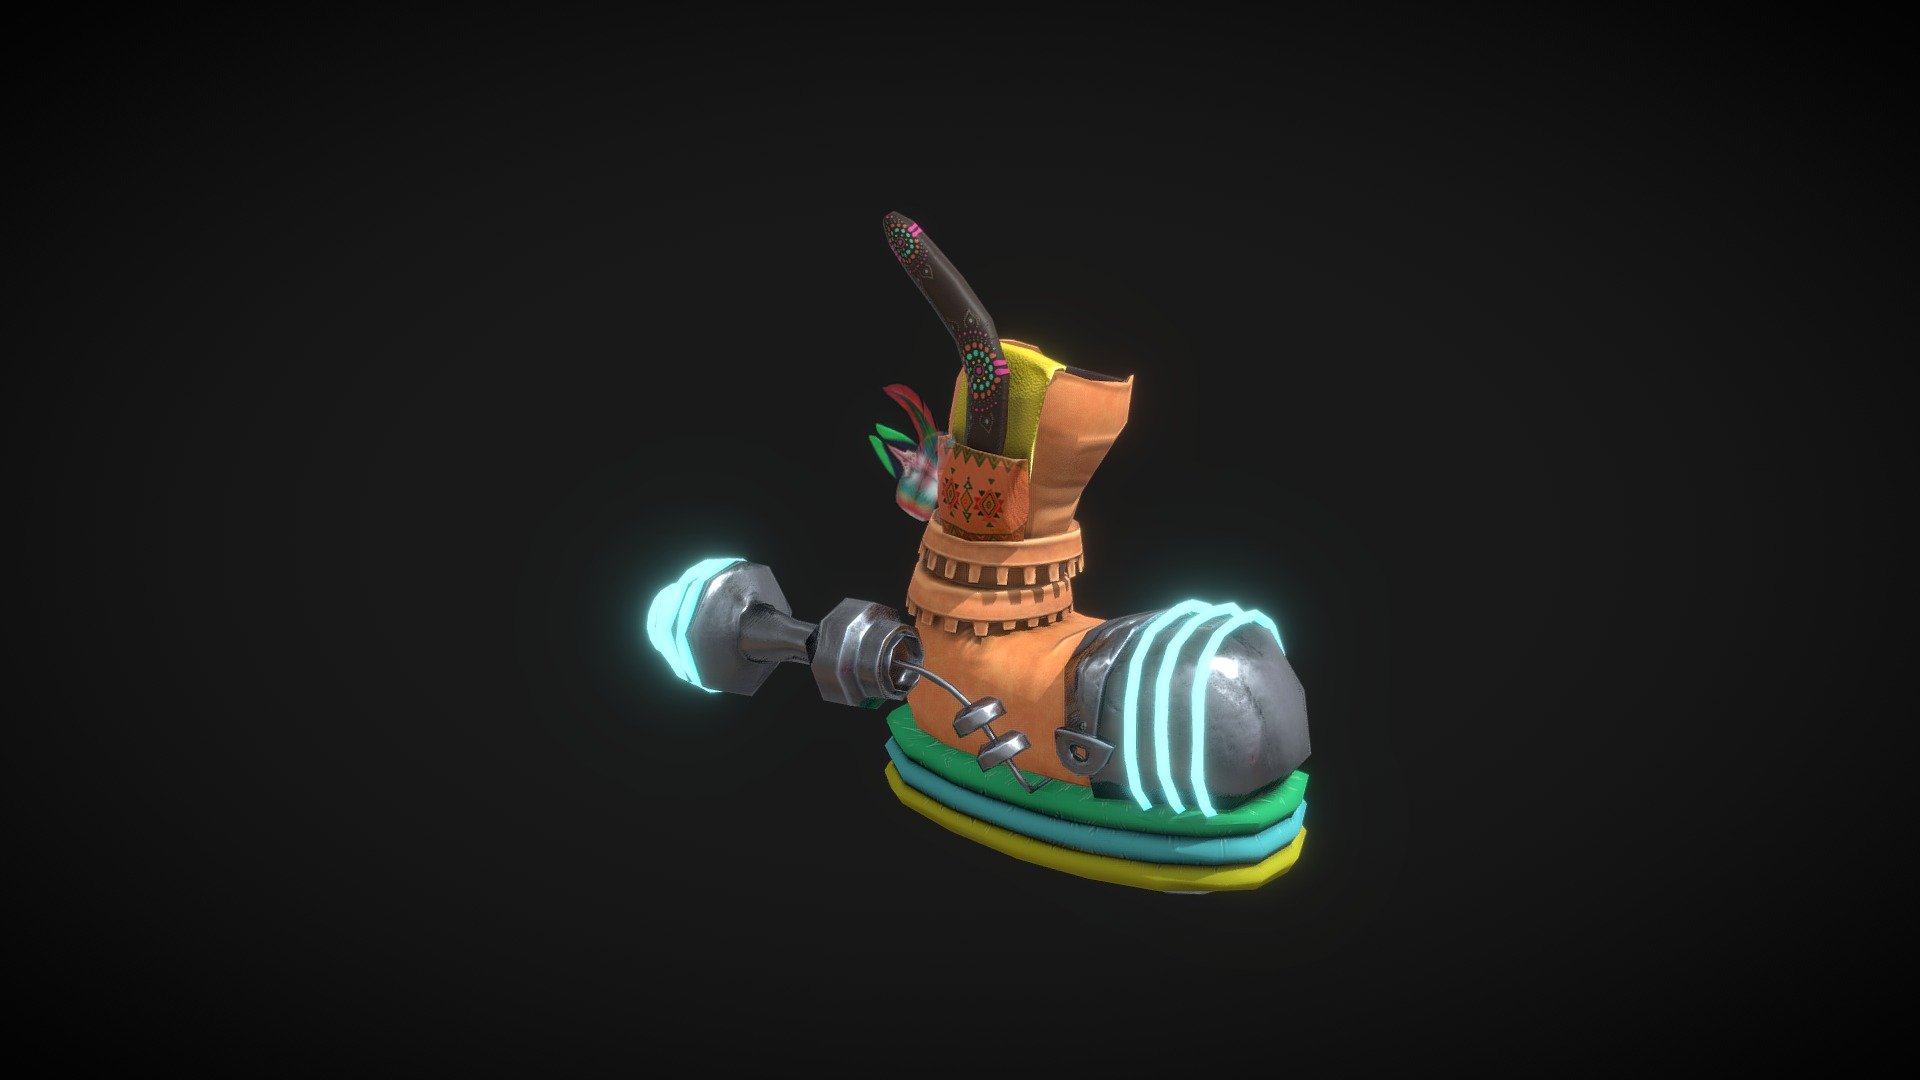 Accessory inspired by the video game Crash Bandicoot, these boots allow Crash to walk in the water and fly because of his rocket’s engines in the sole of the boot. Additionally, it has a boomerang to attack its enemies. The decoration is inspired by the tribes of Australia 3d model